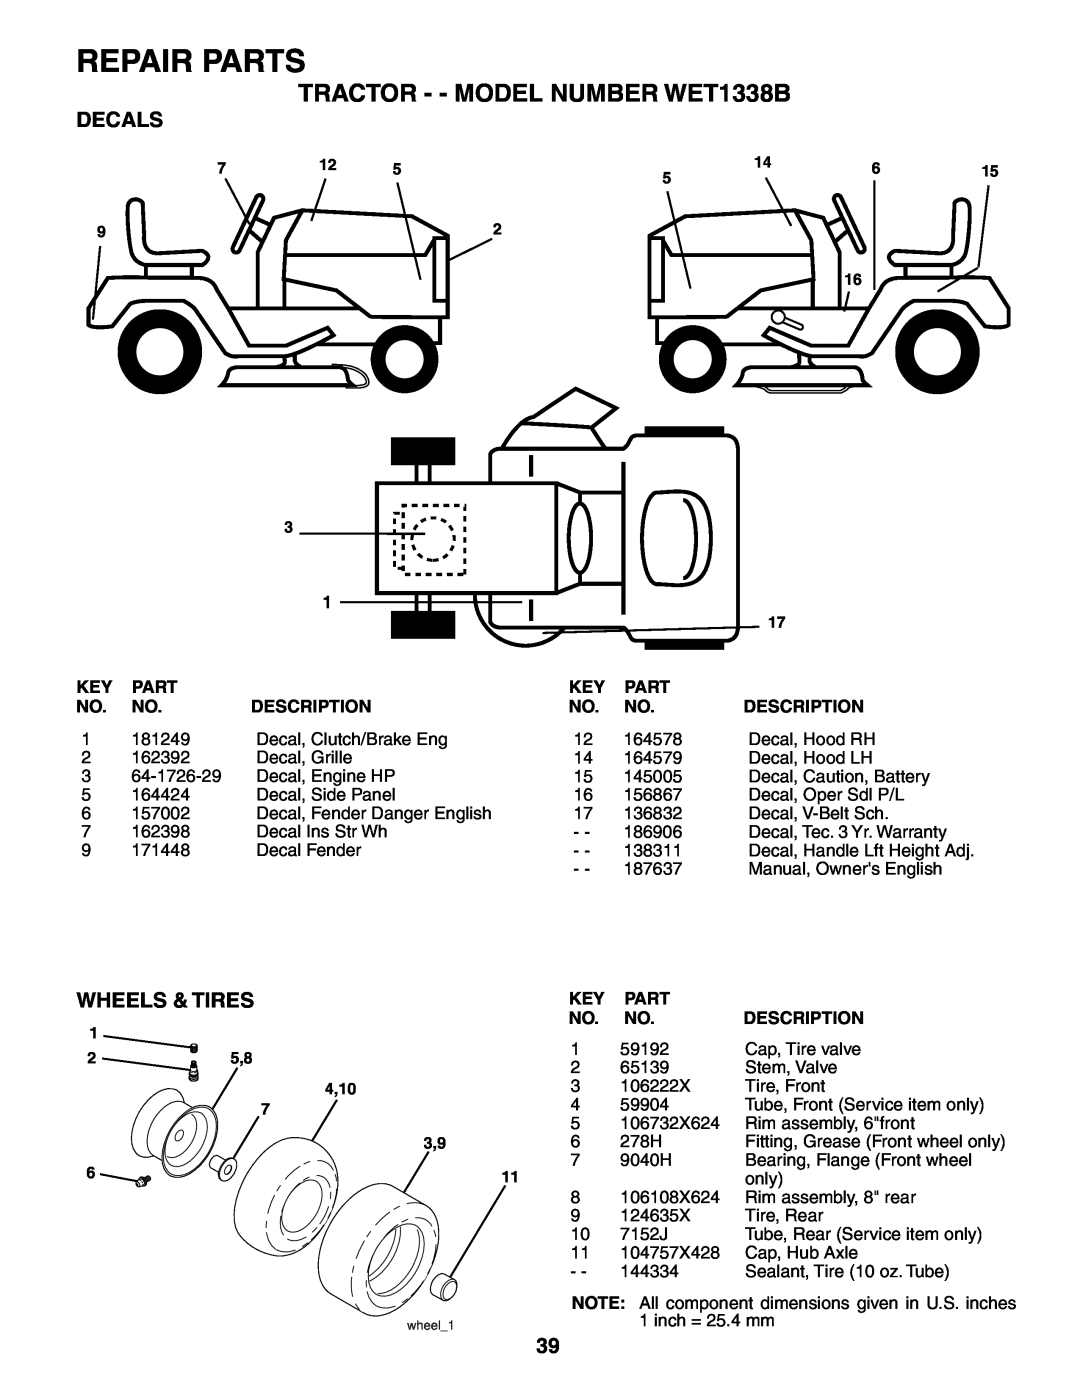 Weed Eater 187637 manual Decals, Wheels & Tires, Repair Parts, TRACTOR - - MODEL NUMBER WET1338B, Description 